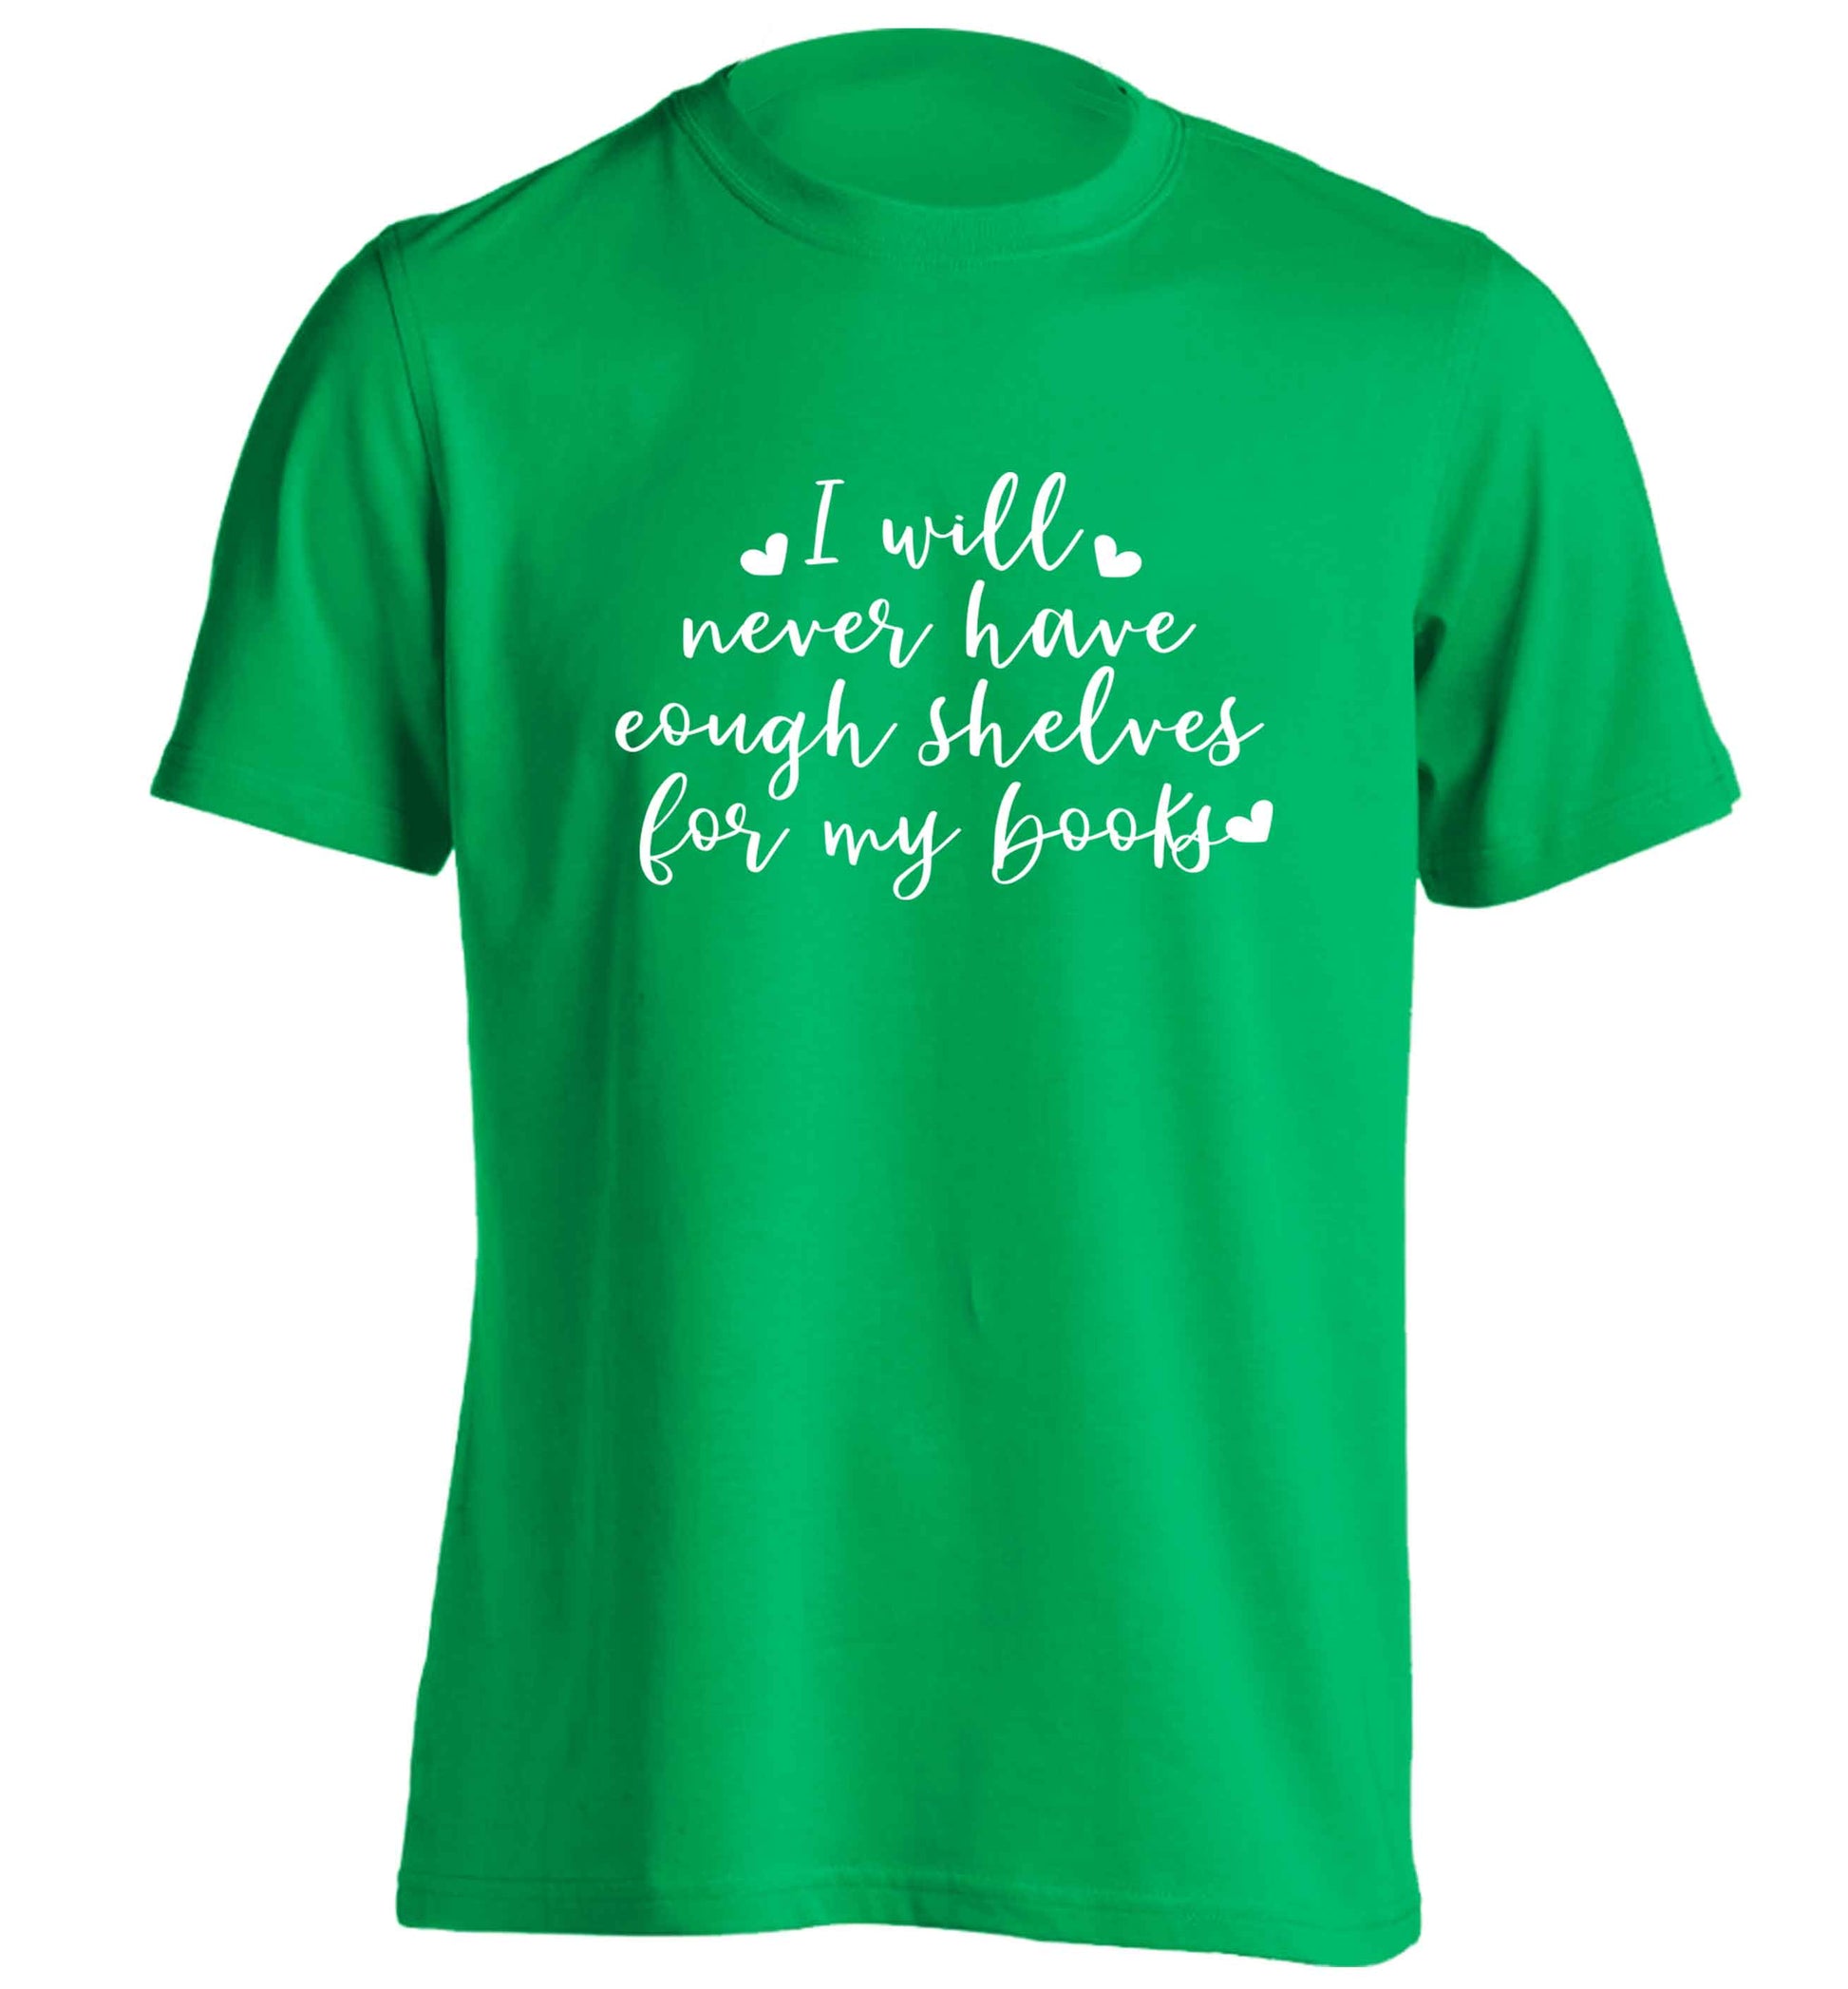 I will never have enough shelves for my books adults unisex green Tshirt 2XL